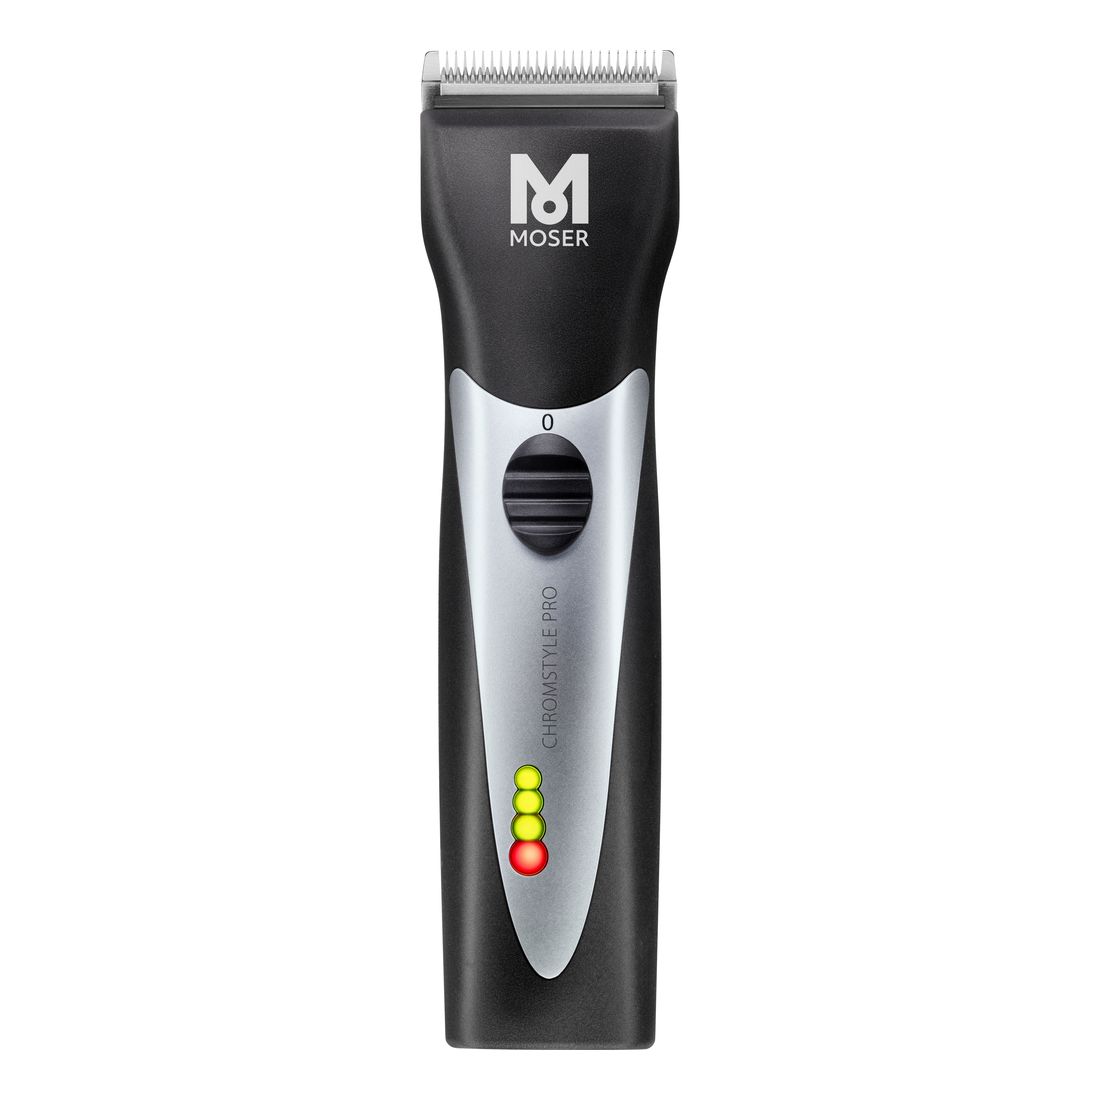 Moser ChromStyle Pro Professional Cord/Cordless Hair Clipper - Black/Silver